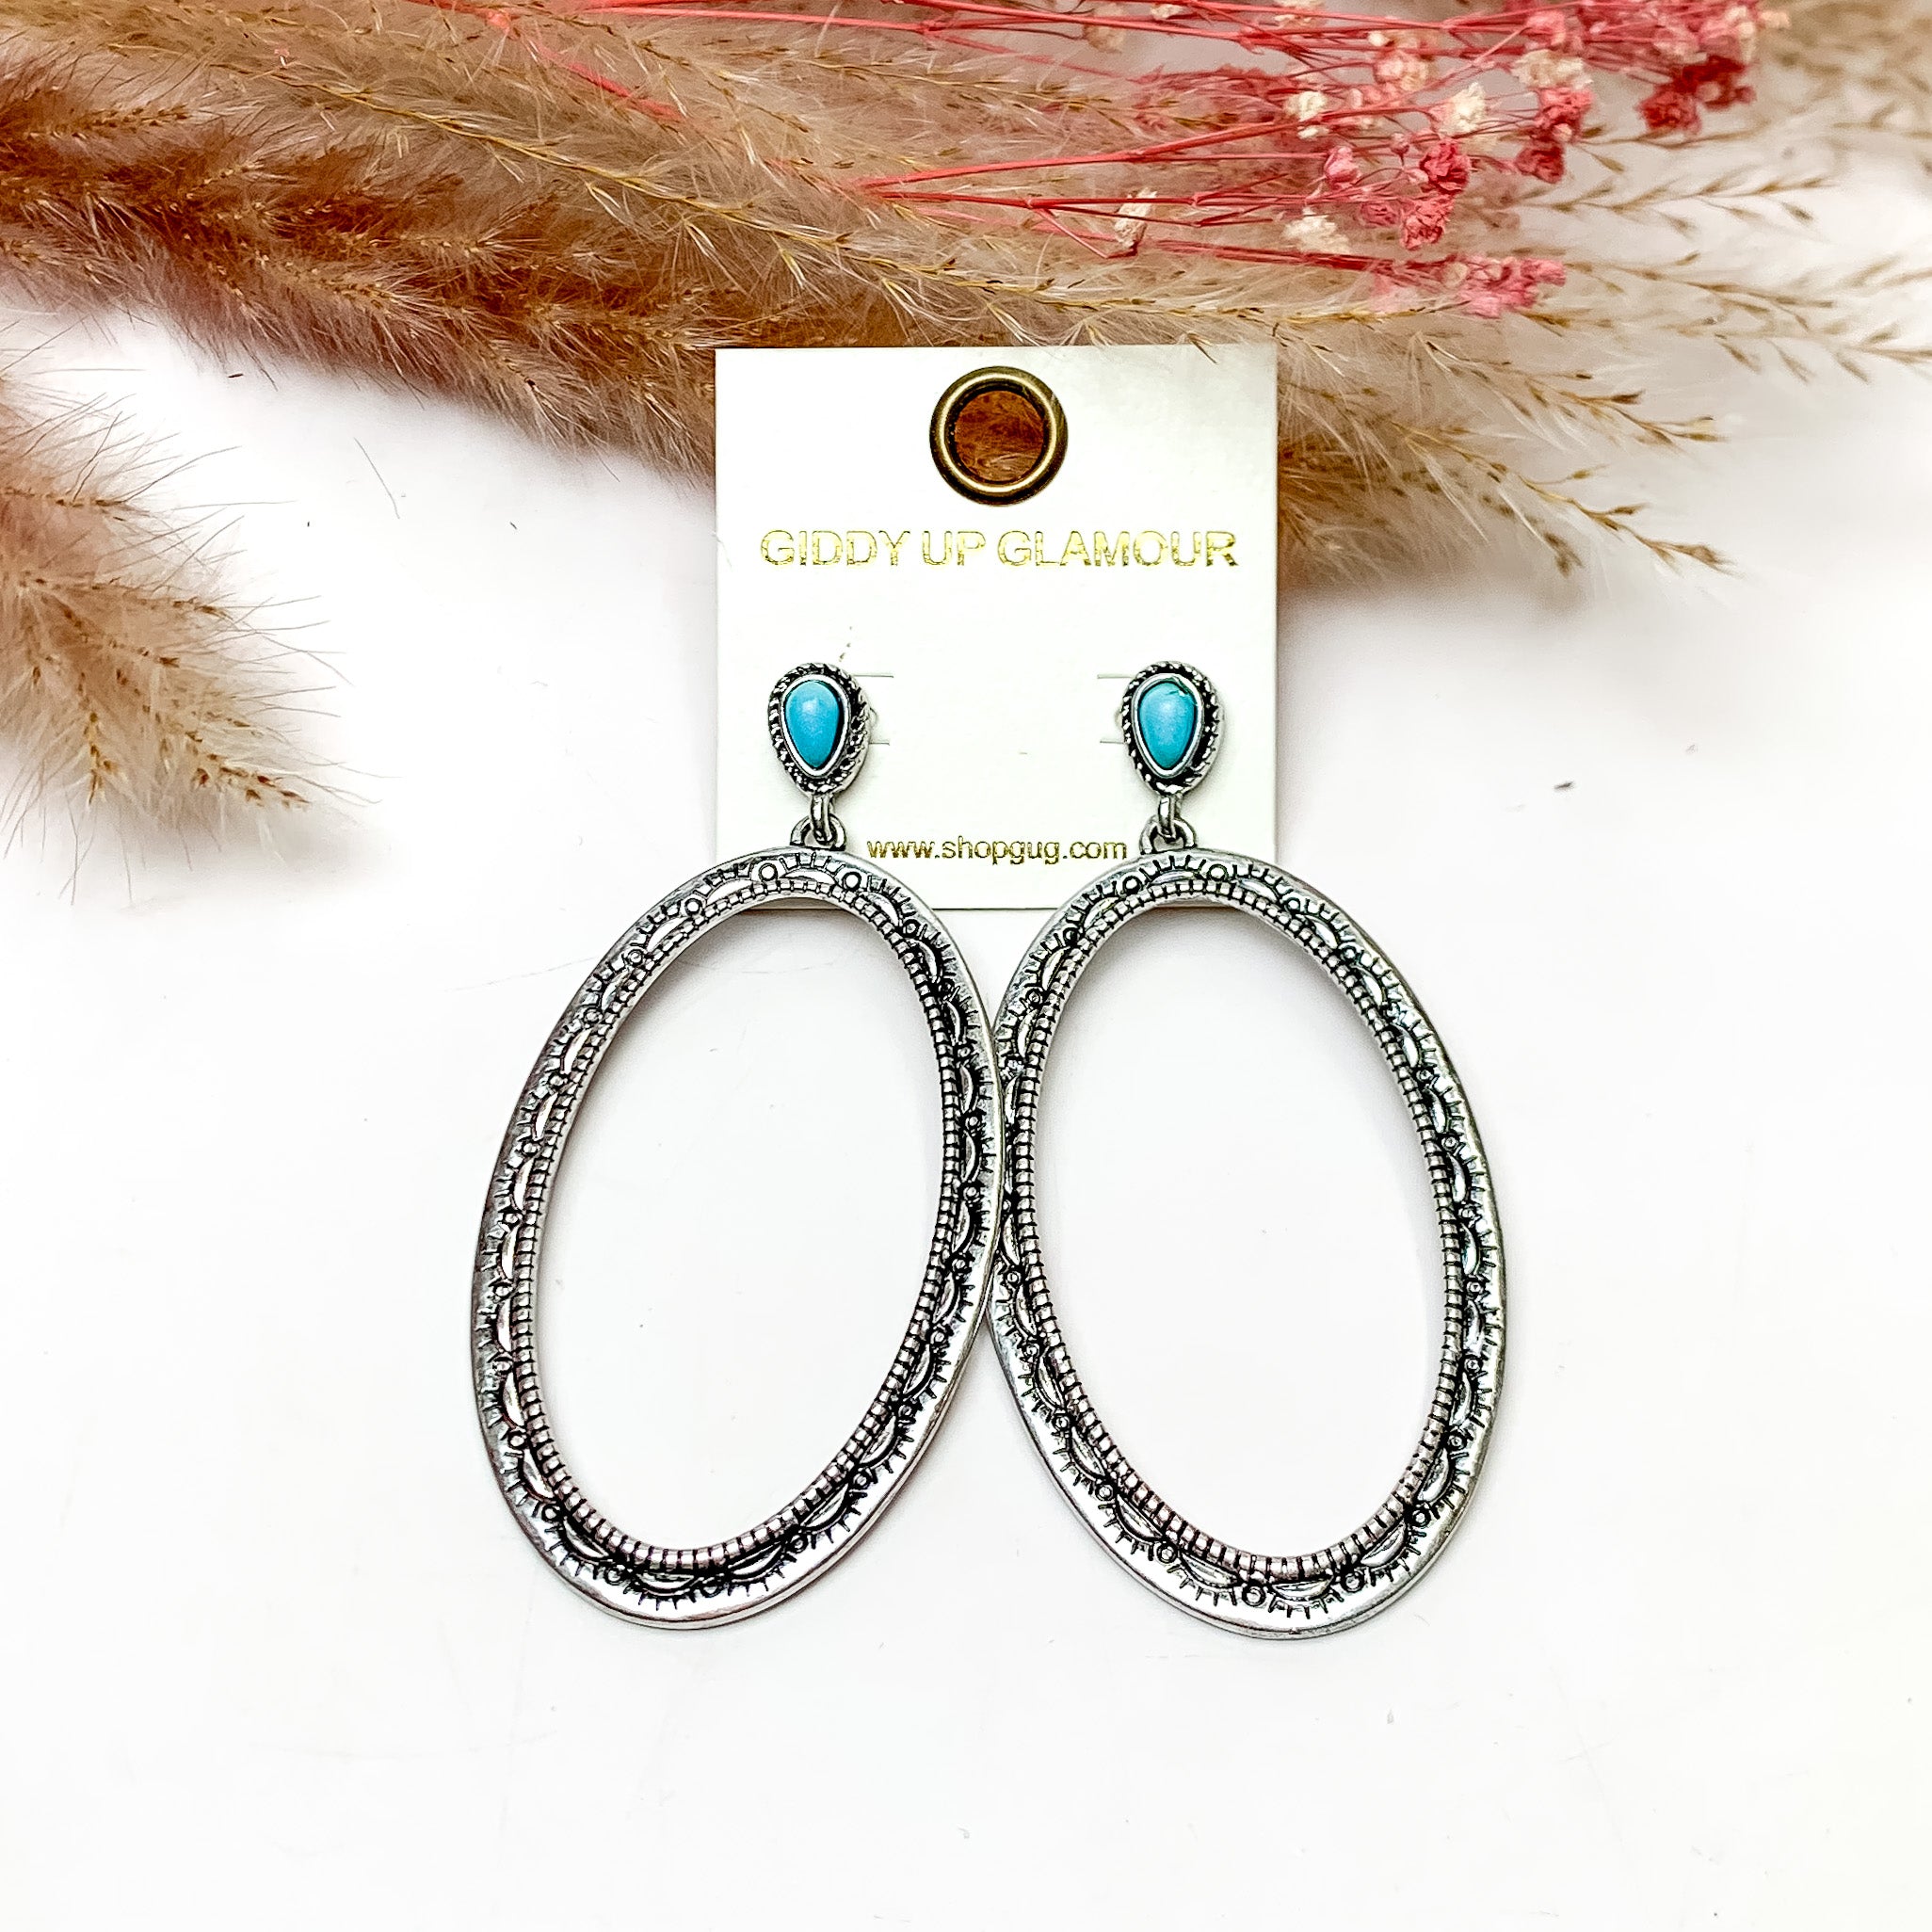 Oval Large Silver Tone Earrings With Turquoise Posts. These earrings are pictured on a white background with plants behind for decoration.